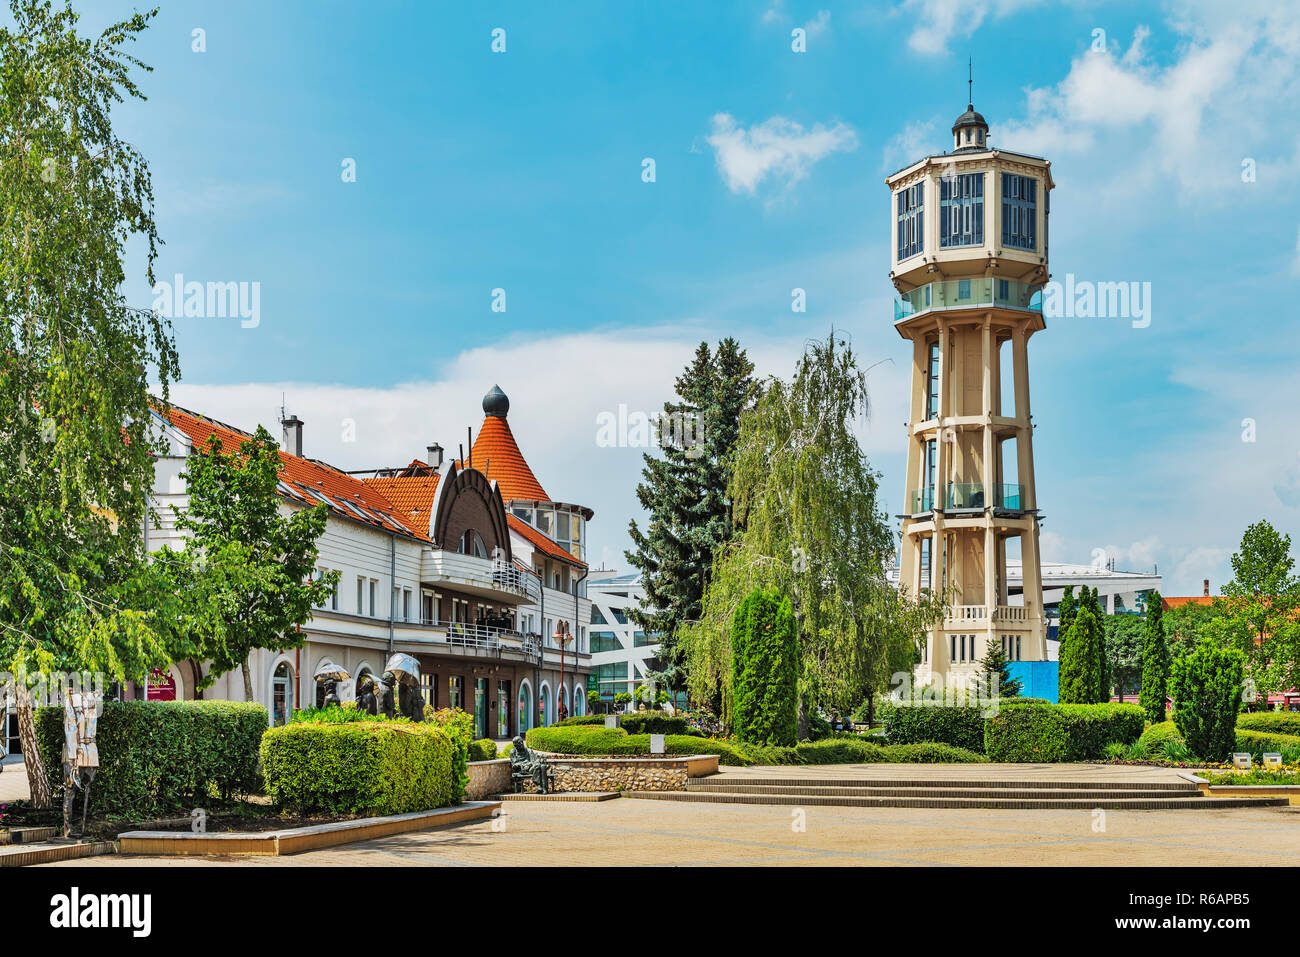 The water tower in Siofok was built in 1912, Siofok, Somogy county, South Transdanubia, Hungary, Europe Stock Photo